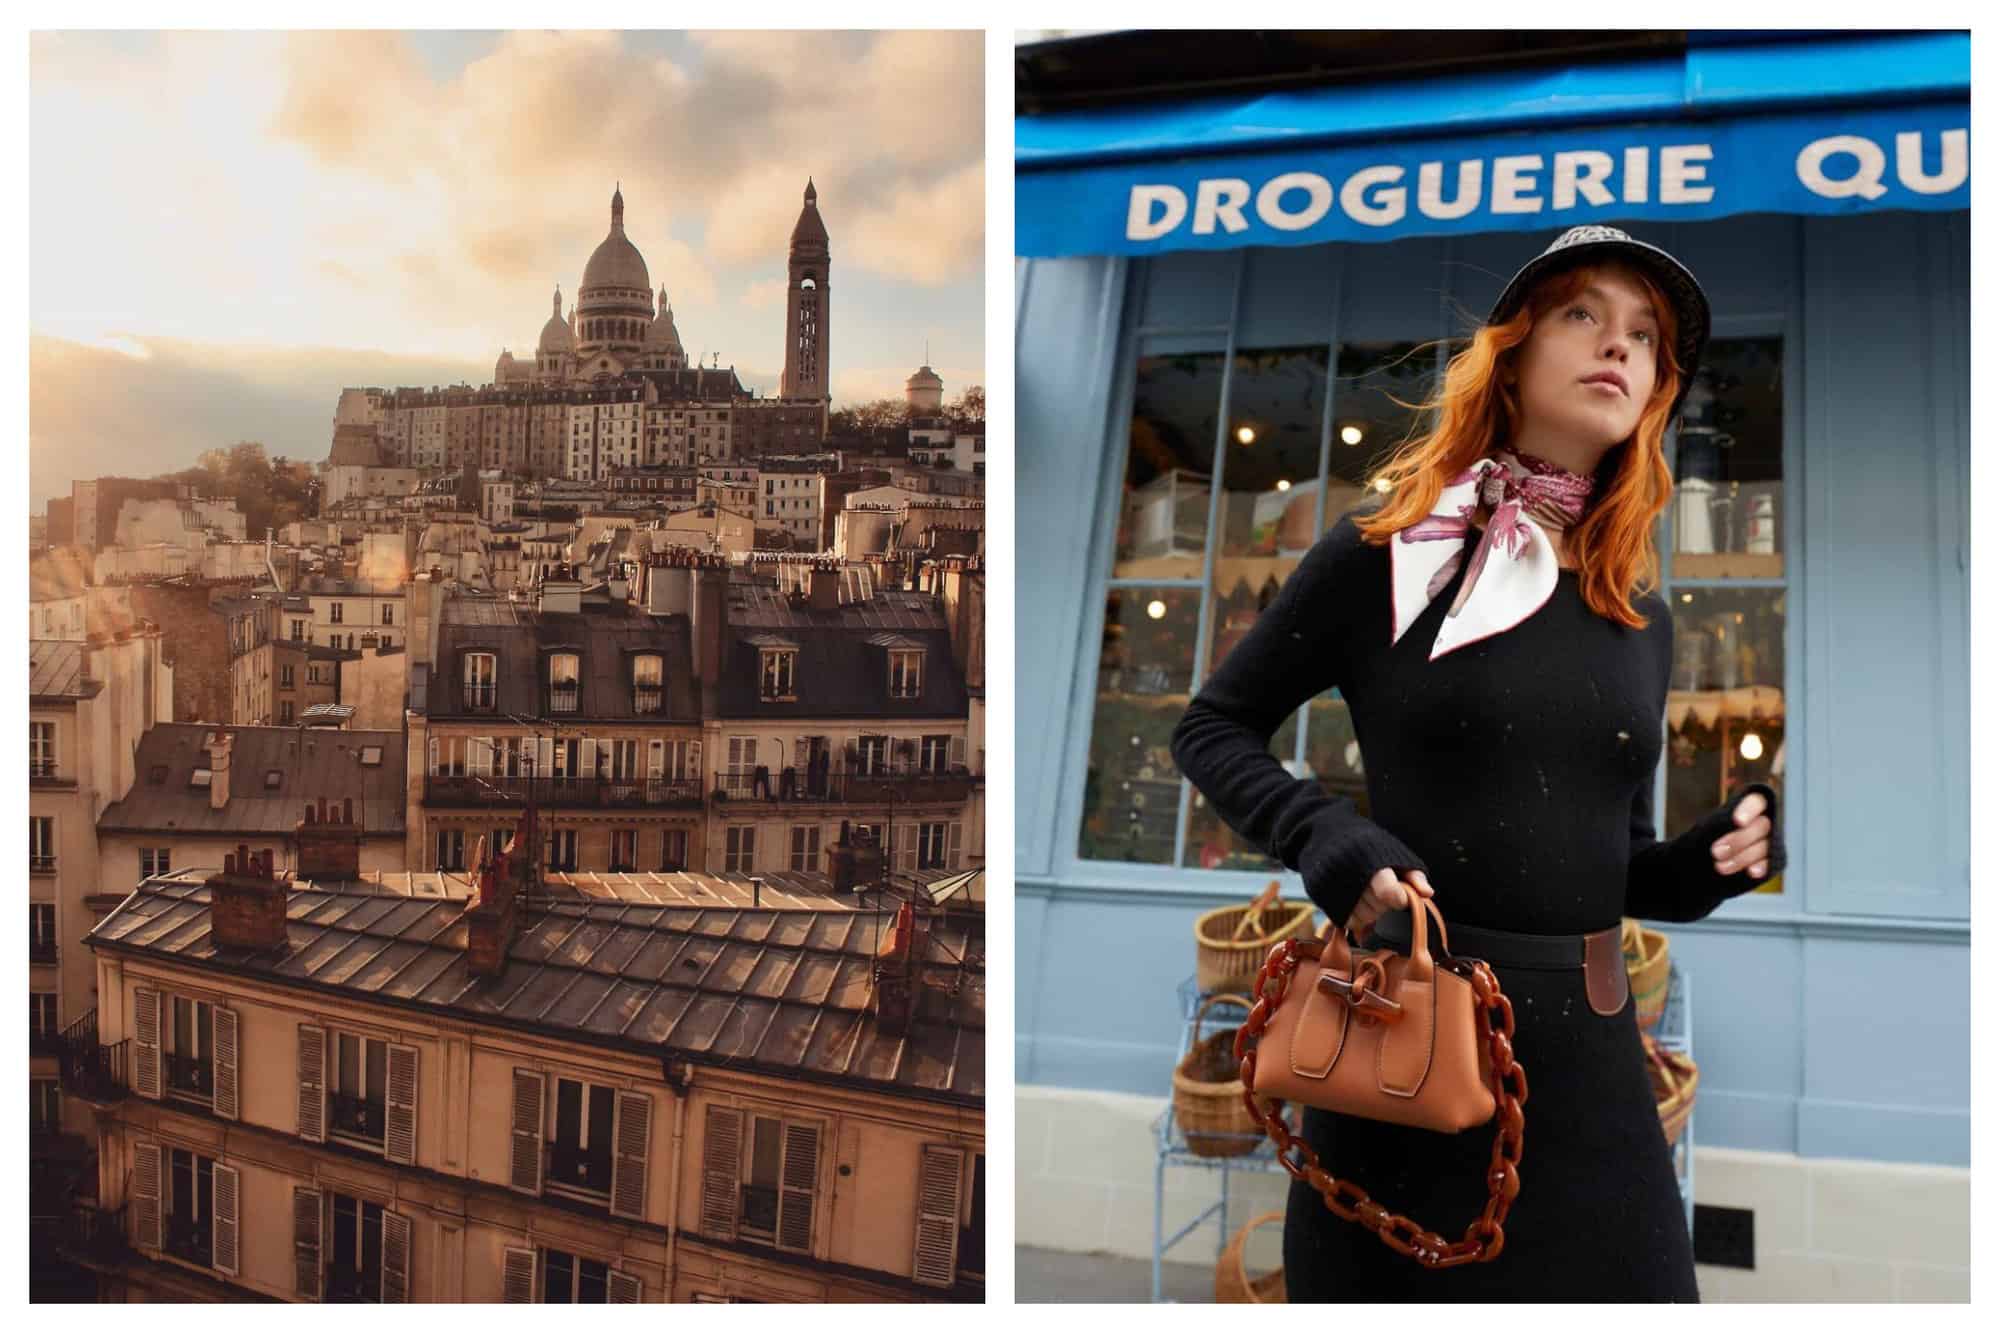 Left- Paris rooftops are shown in a golden light.
Right- A red haired woman wears dark clothing, a white scarf, and carries small leather bag. 